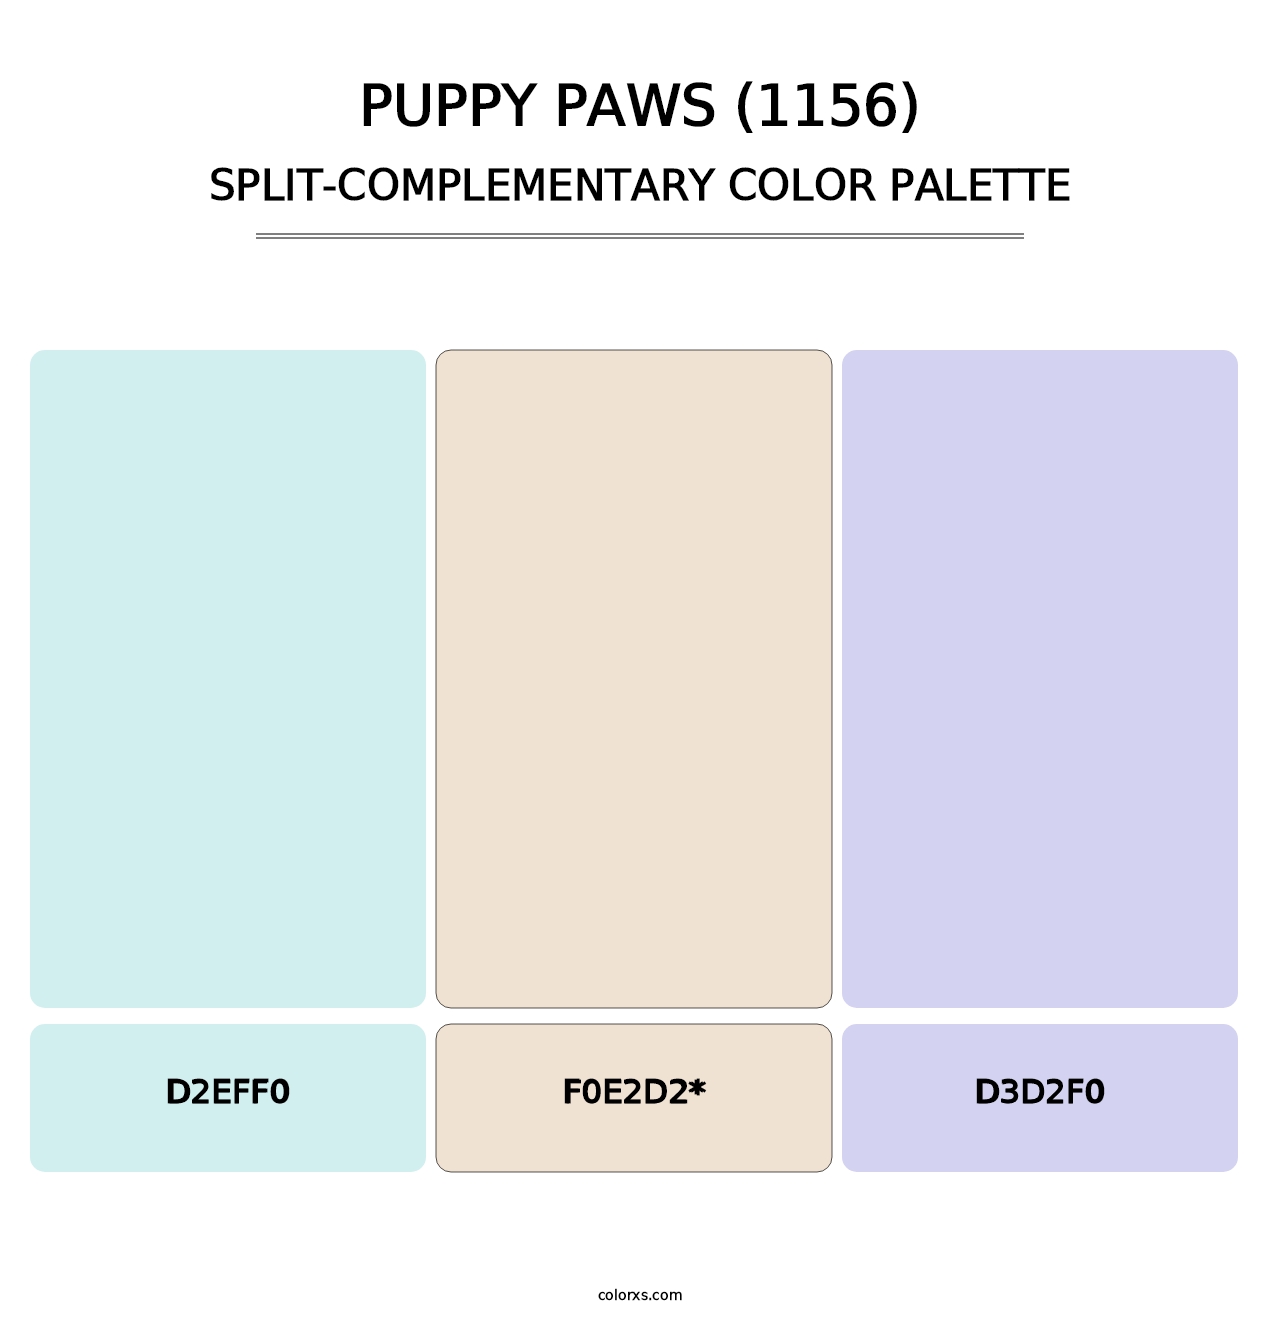 Puppy Paws (1156) - Split-Complementary Color Palette